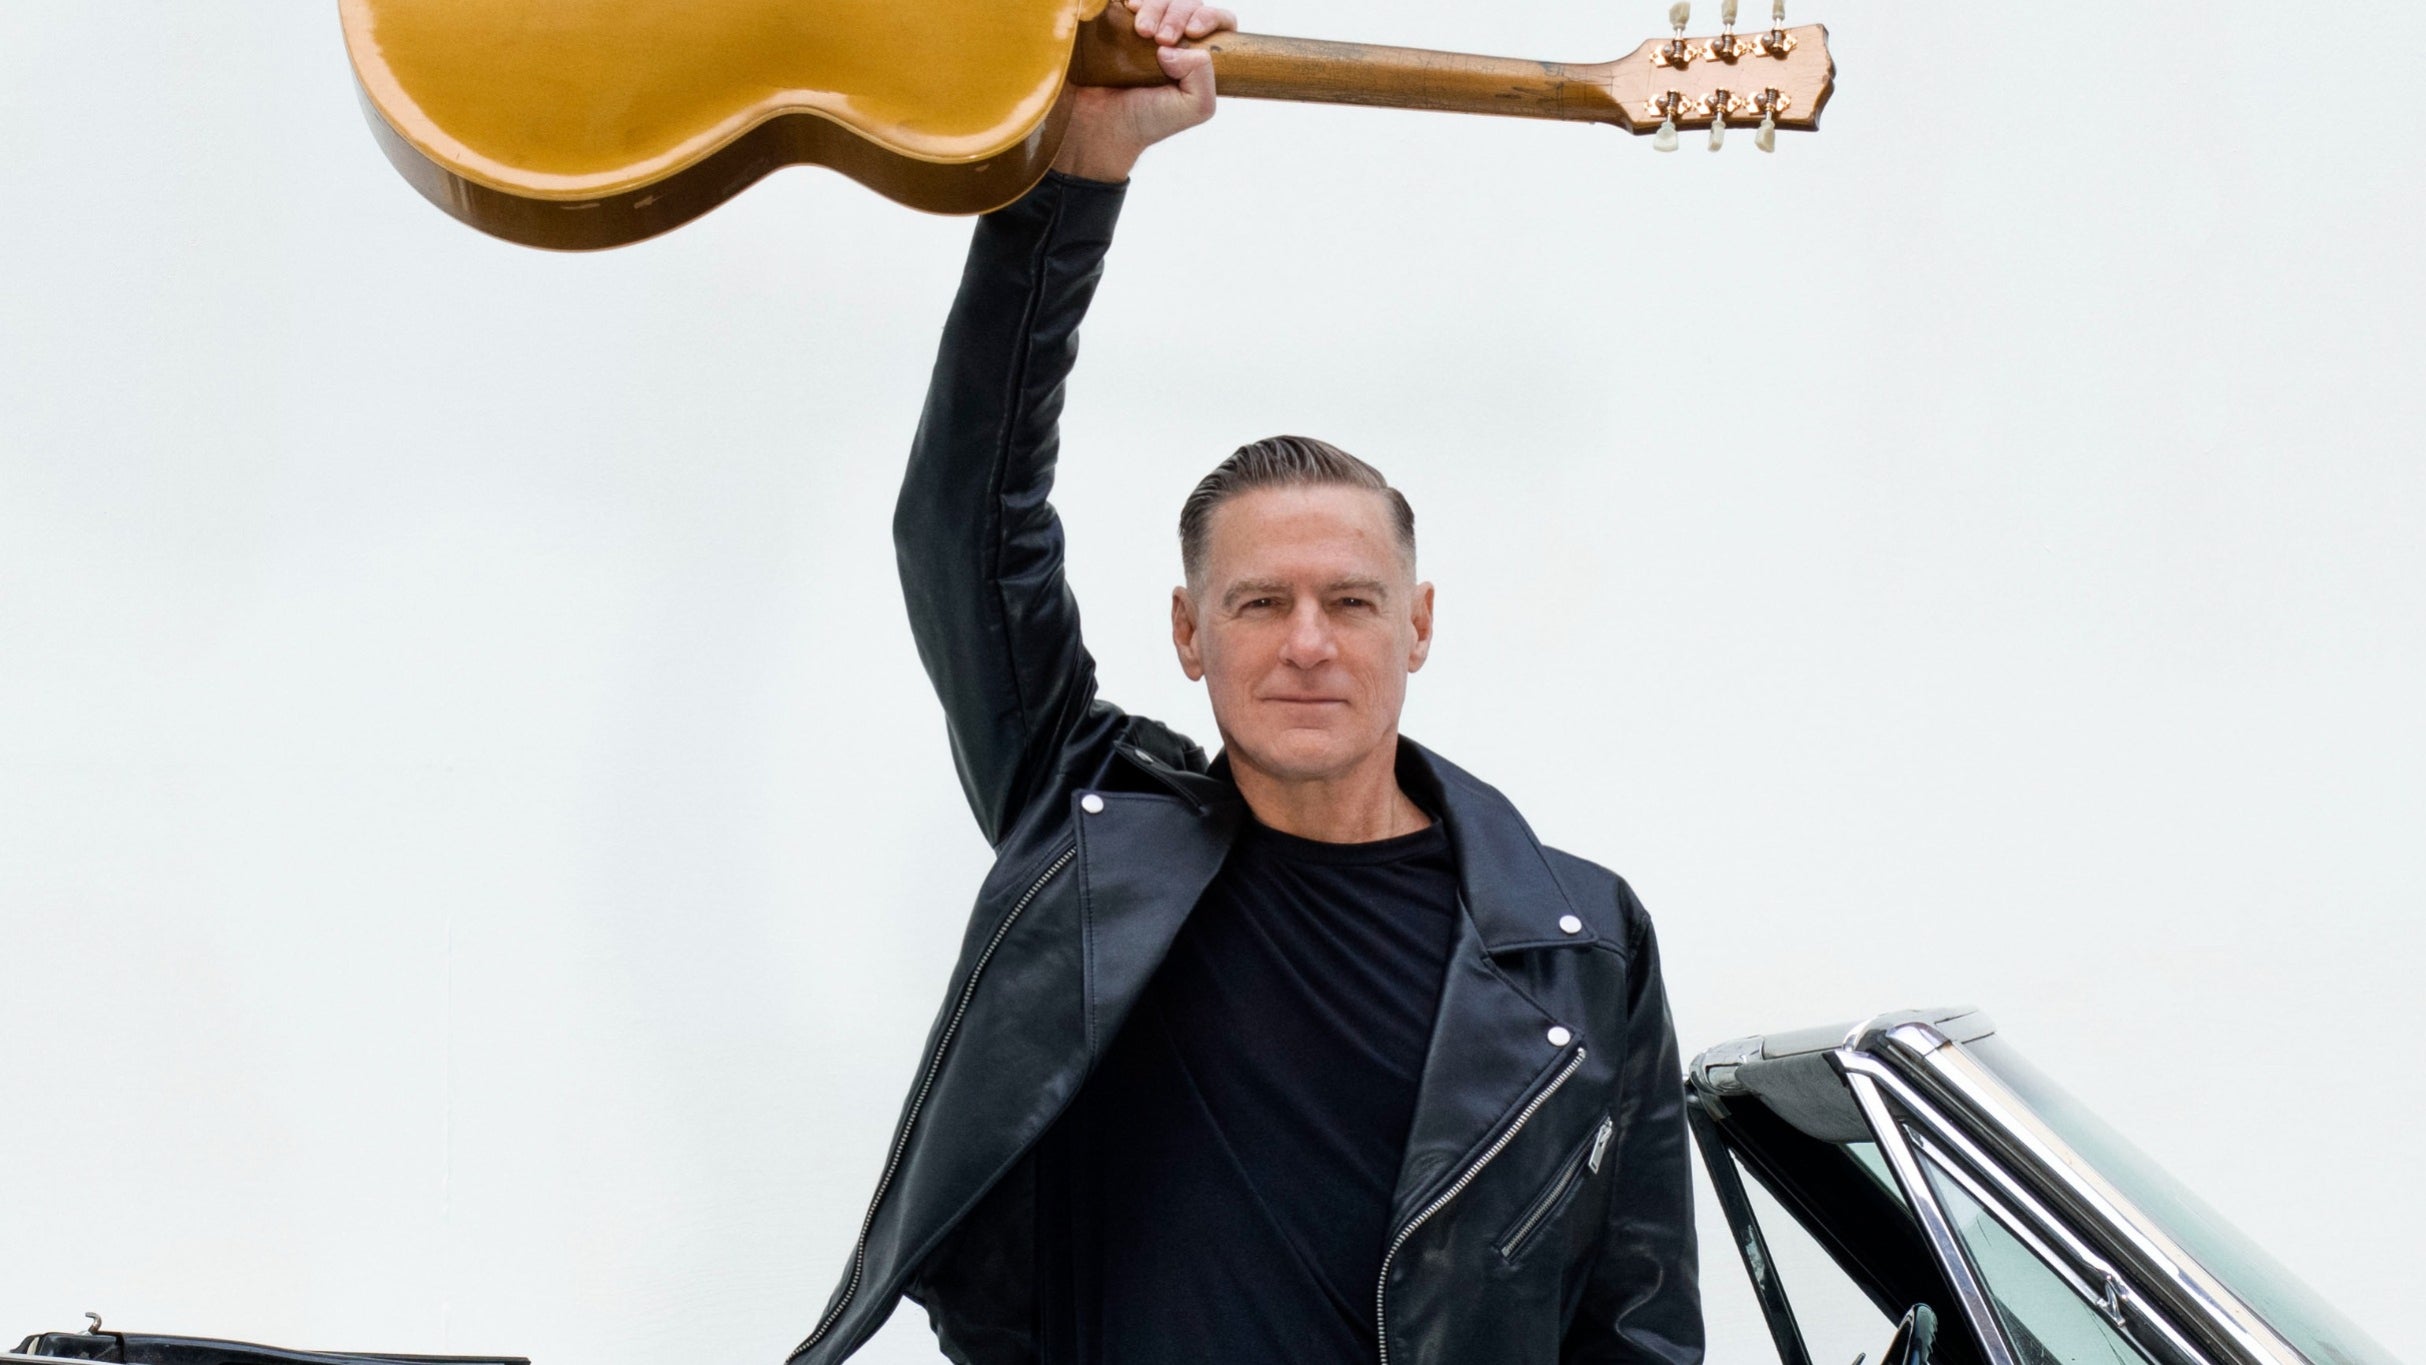 Bryan Adams: So Happy It Hurts w/ Eurythmics Songbook ft. Dave Stewart free presale code for early tickets in Newark